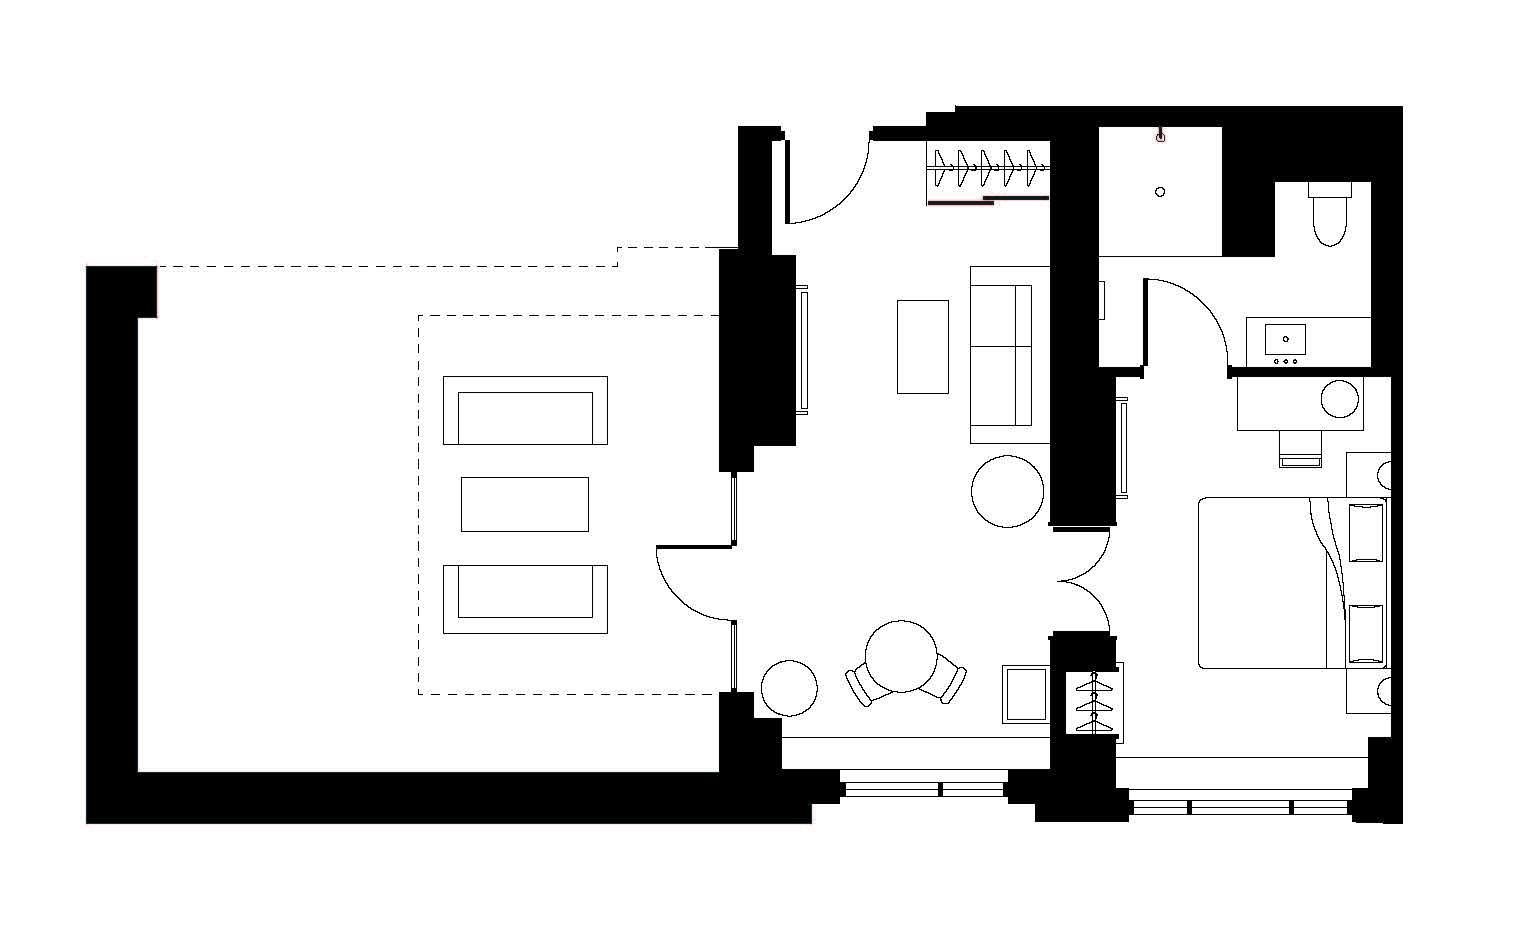 Floor Plan of the Terrace Suite room at Soho Grand Hotel.